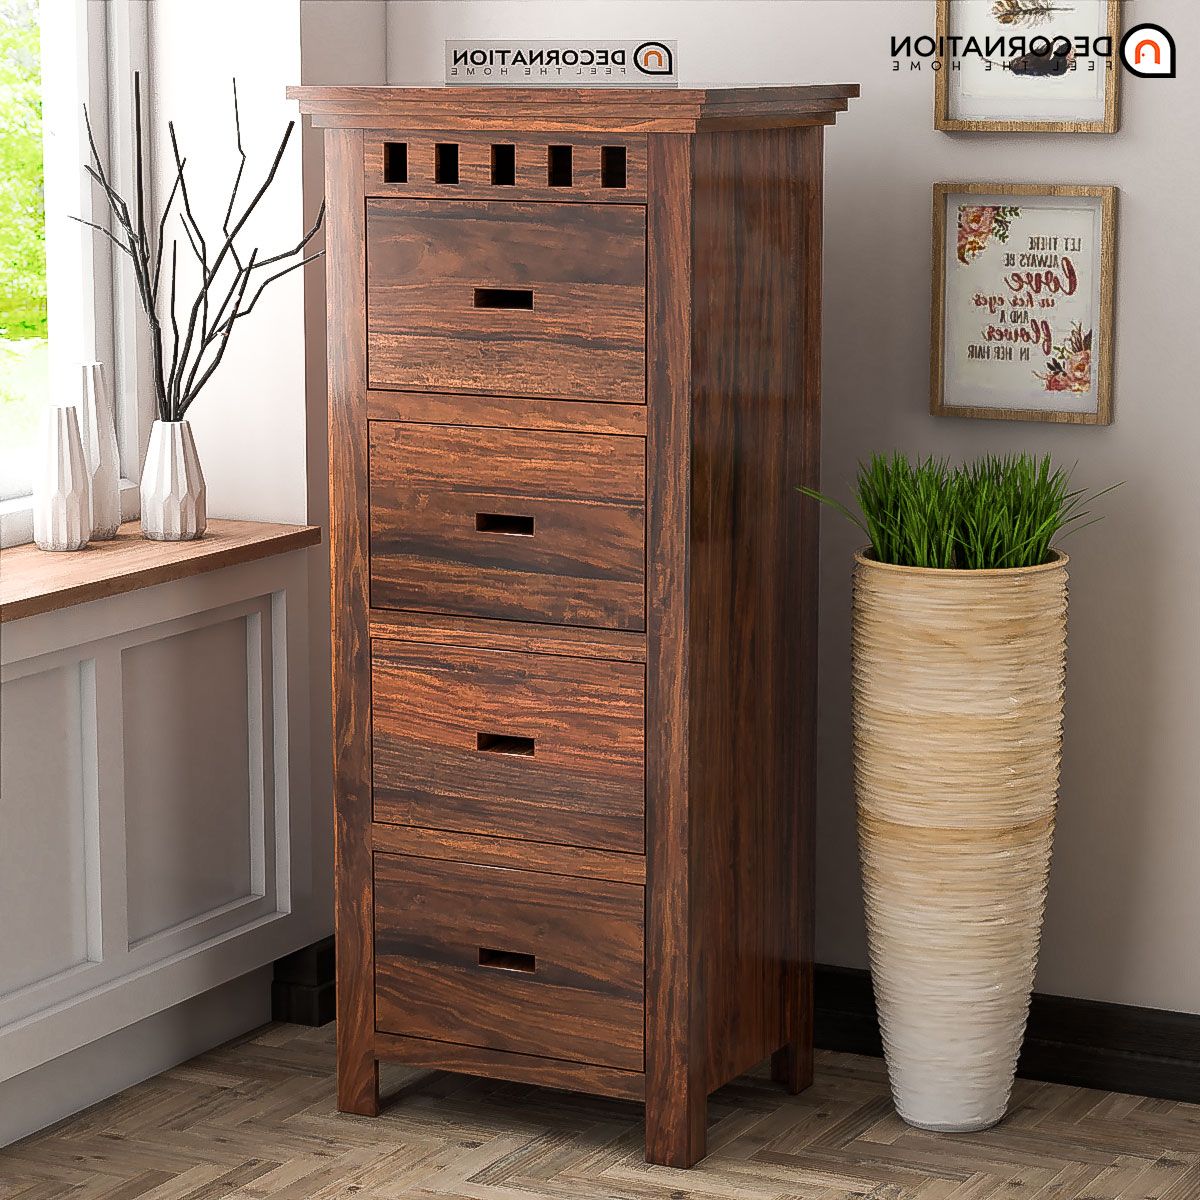 Paphos Wooden 4 Drawer Storage Cabinet – Decornation Intended For Wood Cabinet With Drawers (View 2 of 20)